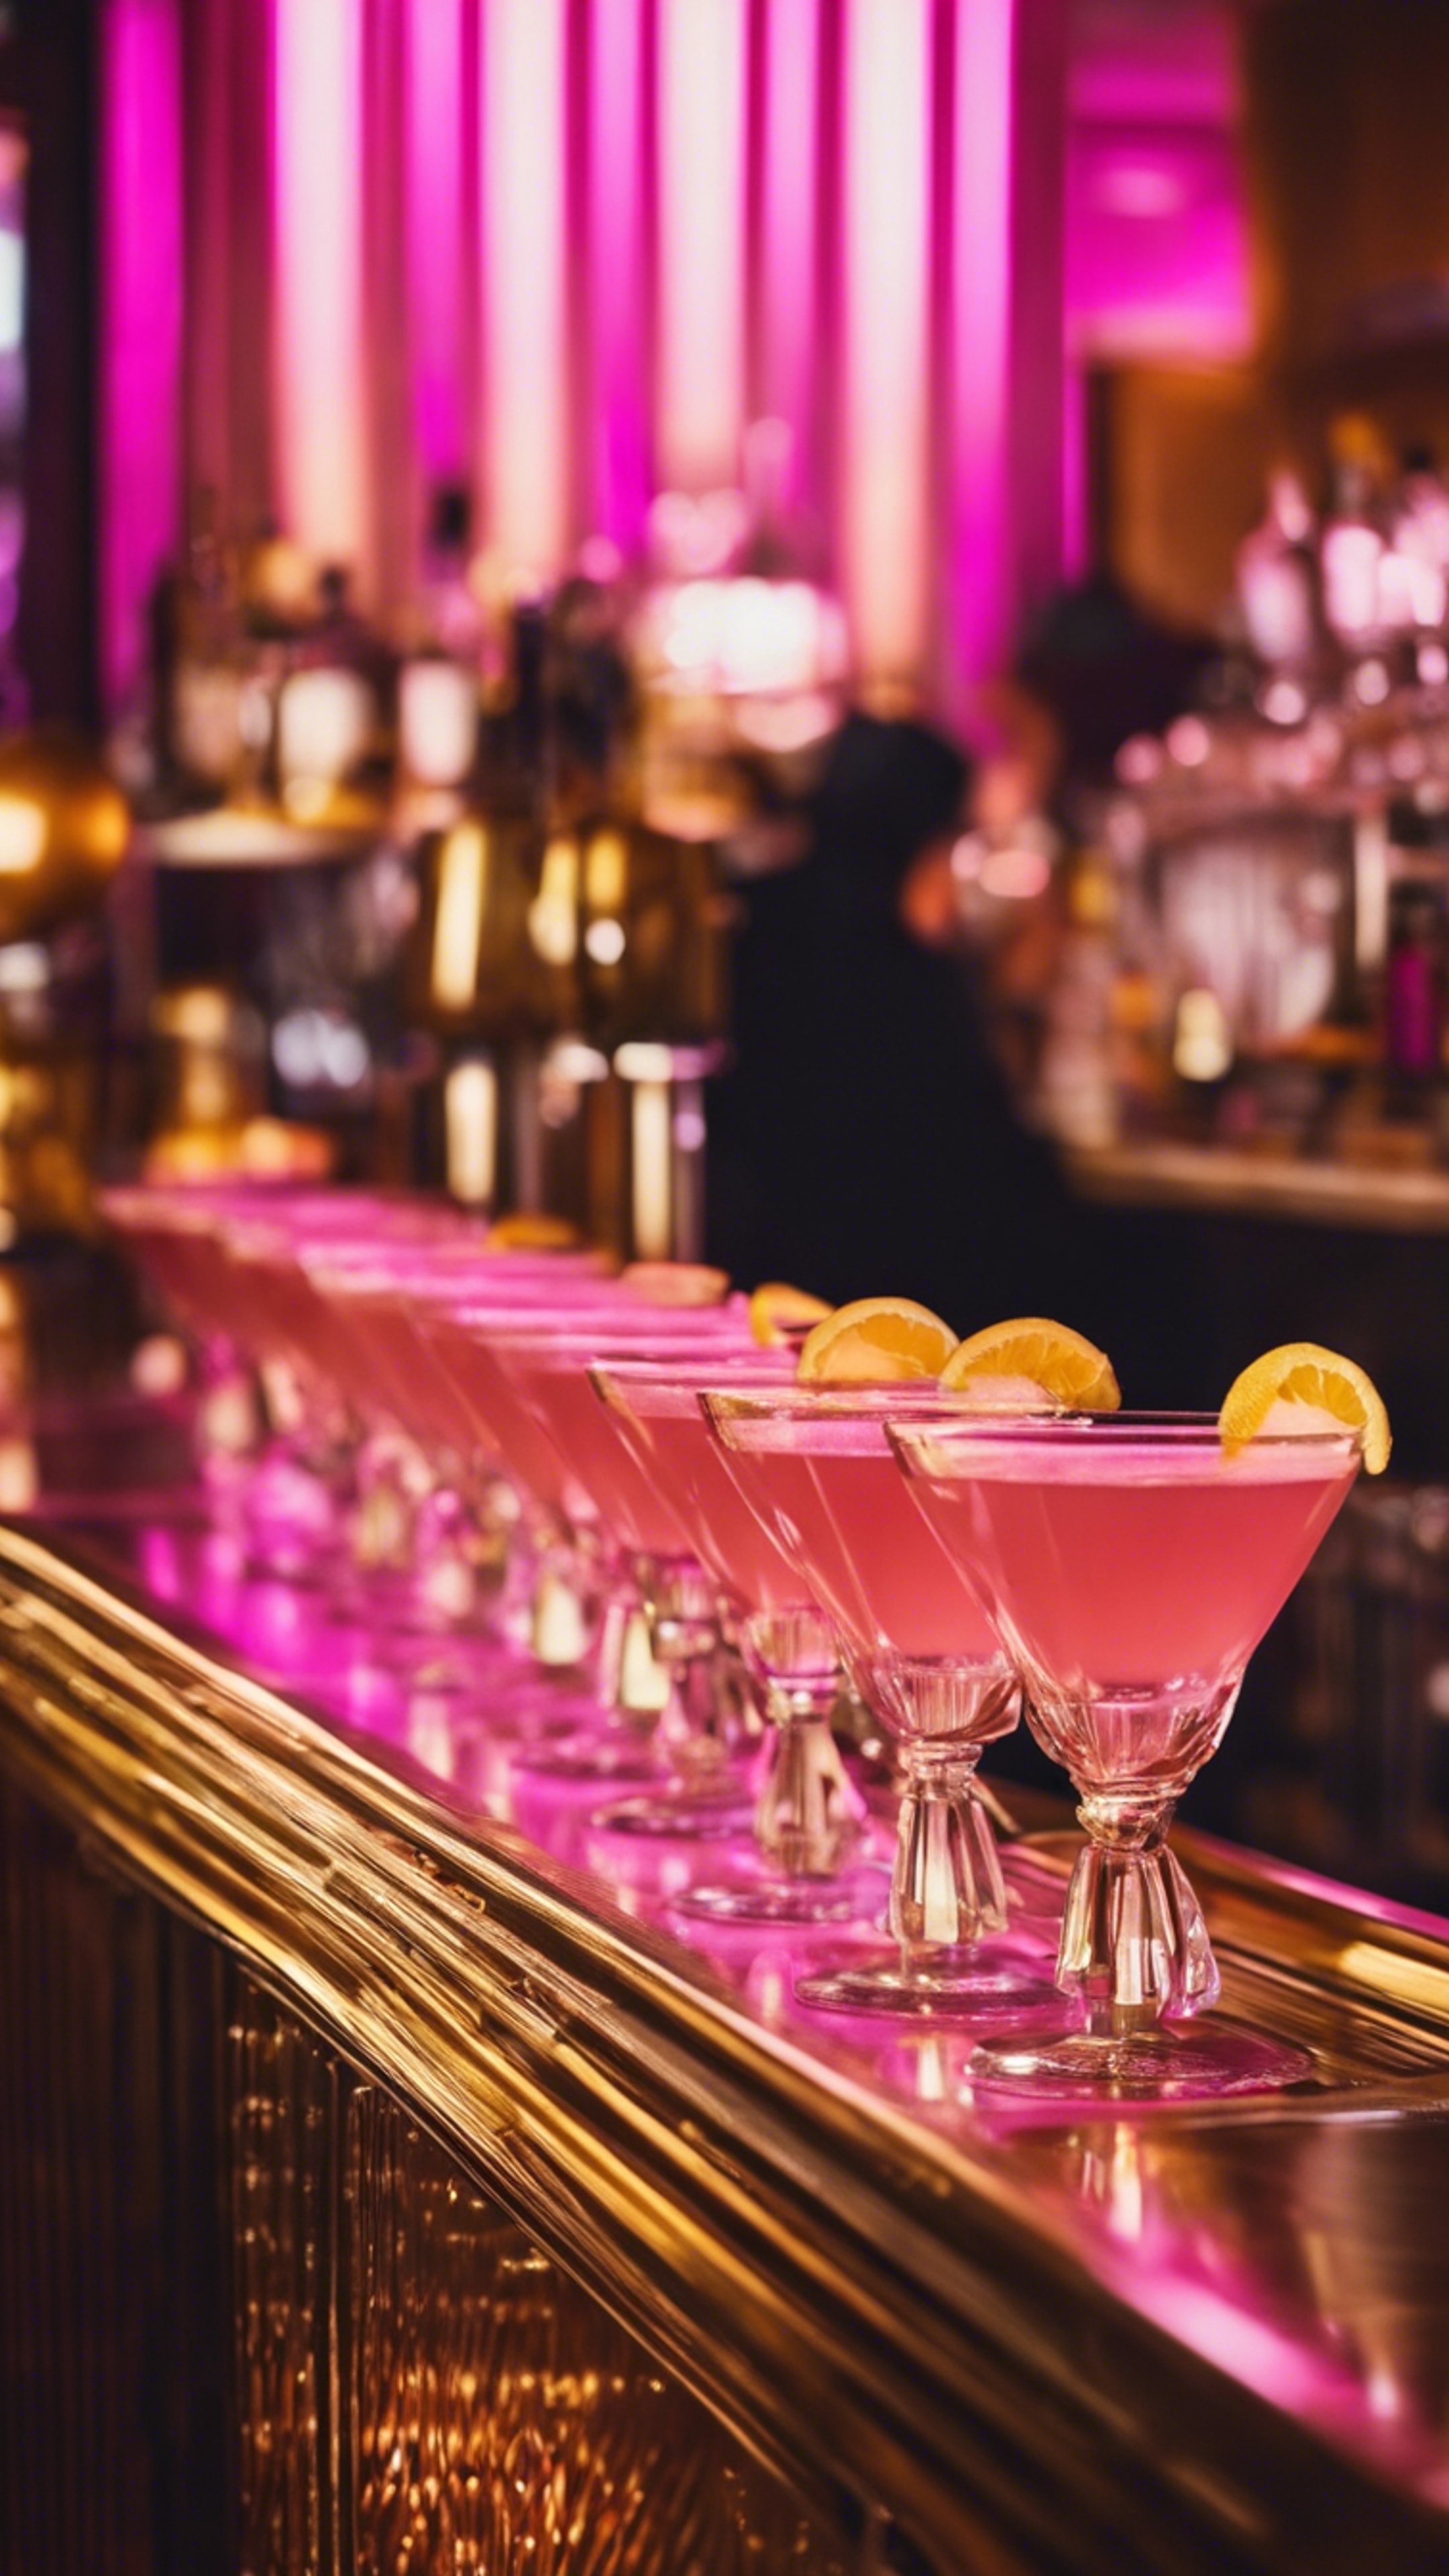 An art deco style pink and gold cocktail bar, bustling with glamour and elegance. Wallpaper[0d4a66f95ef04aa3ad16]